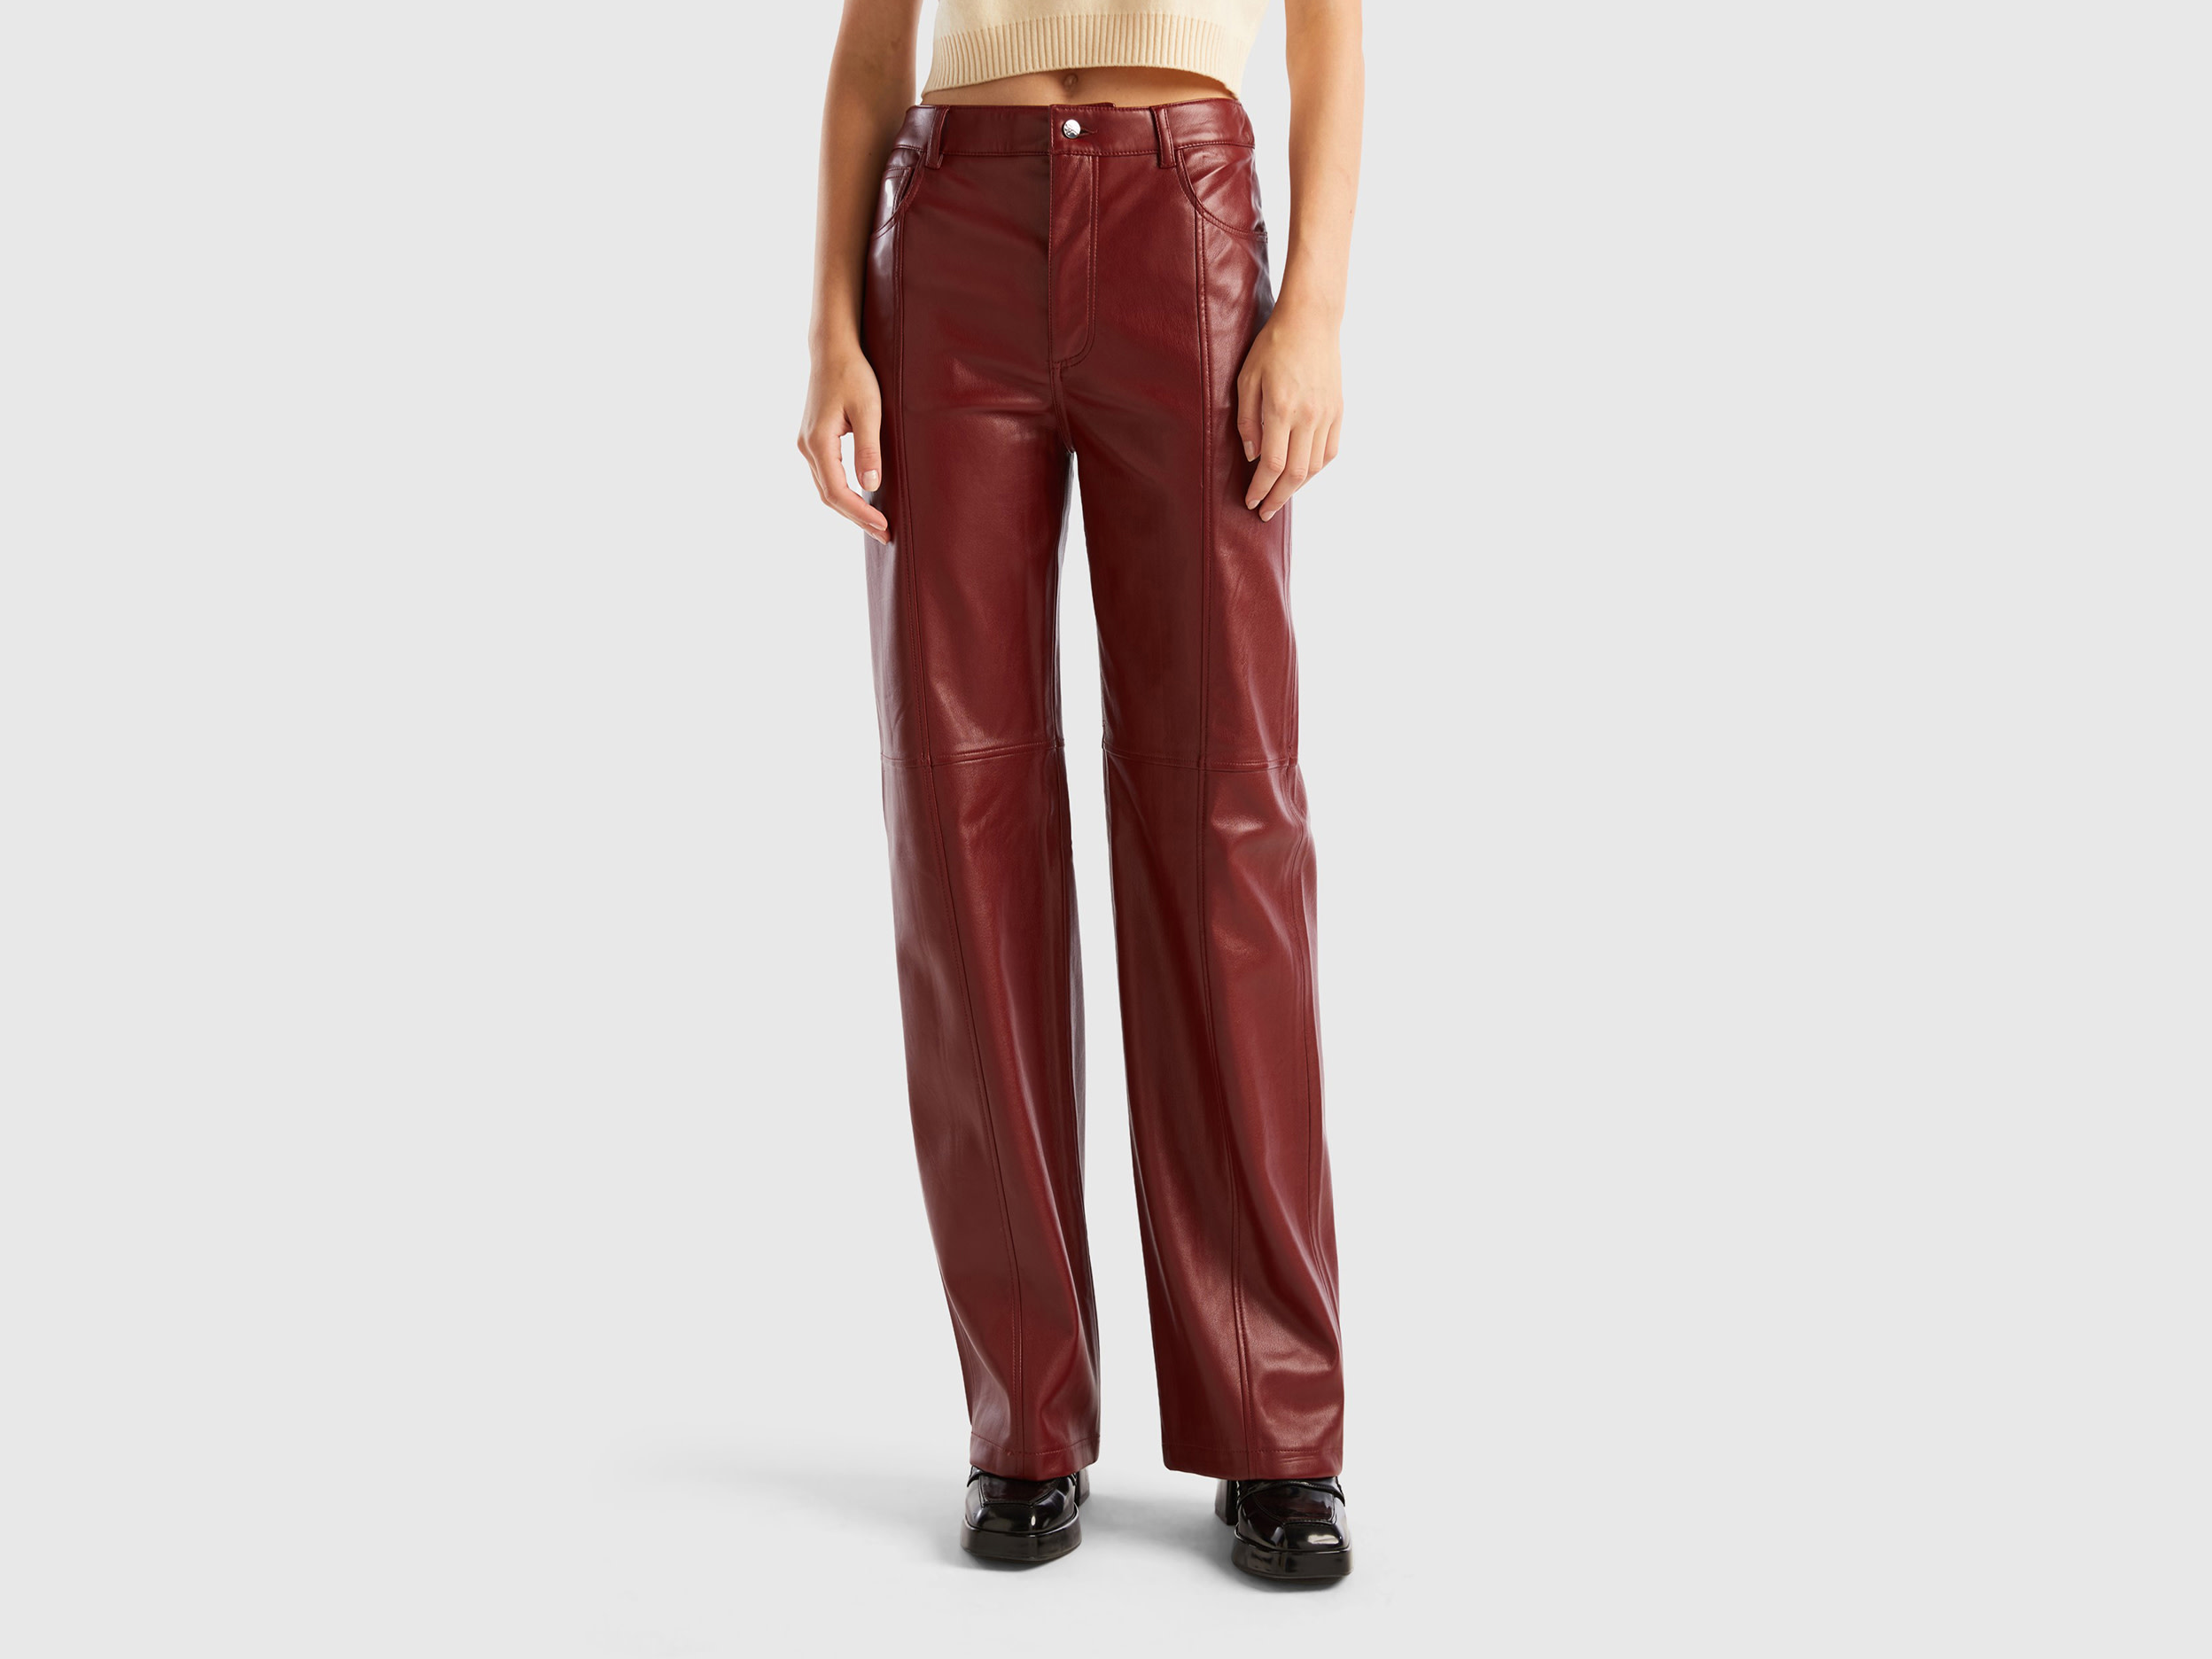 Benetton, Trousers In Imitation Leather Fabric, size 12, Burgundy, Women